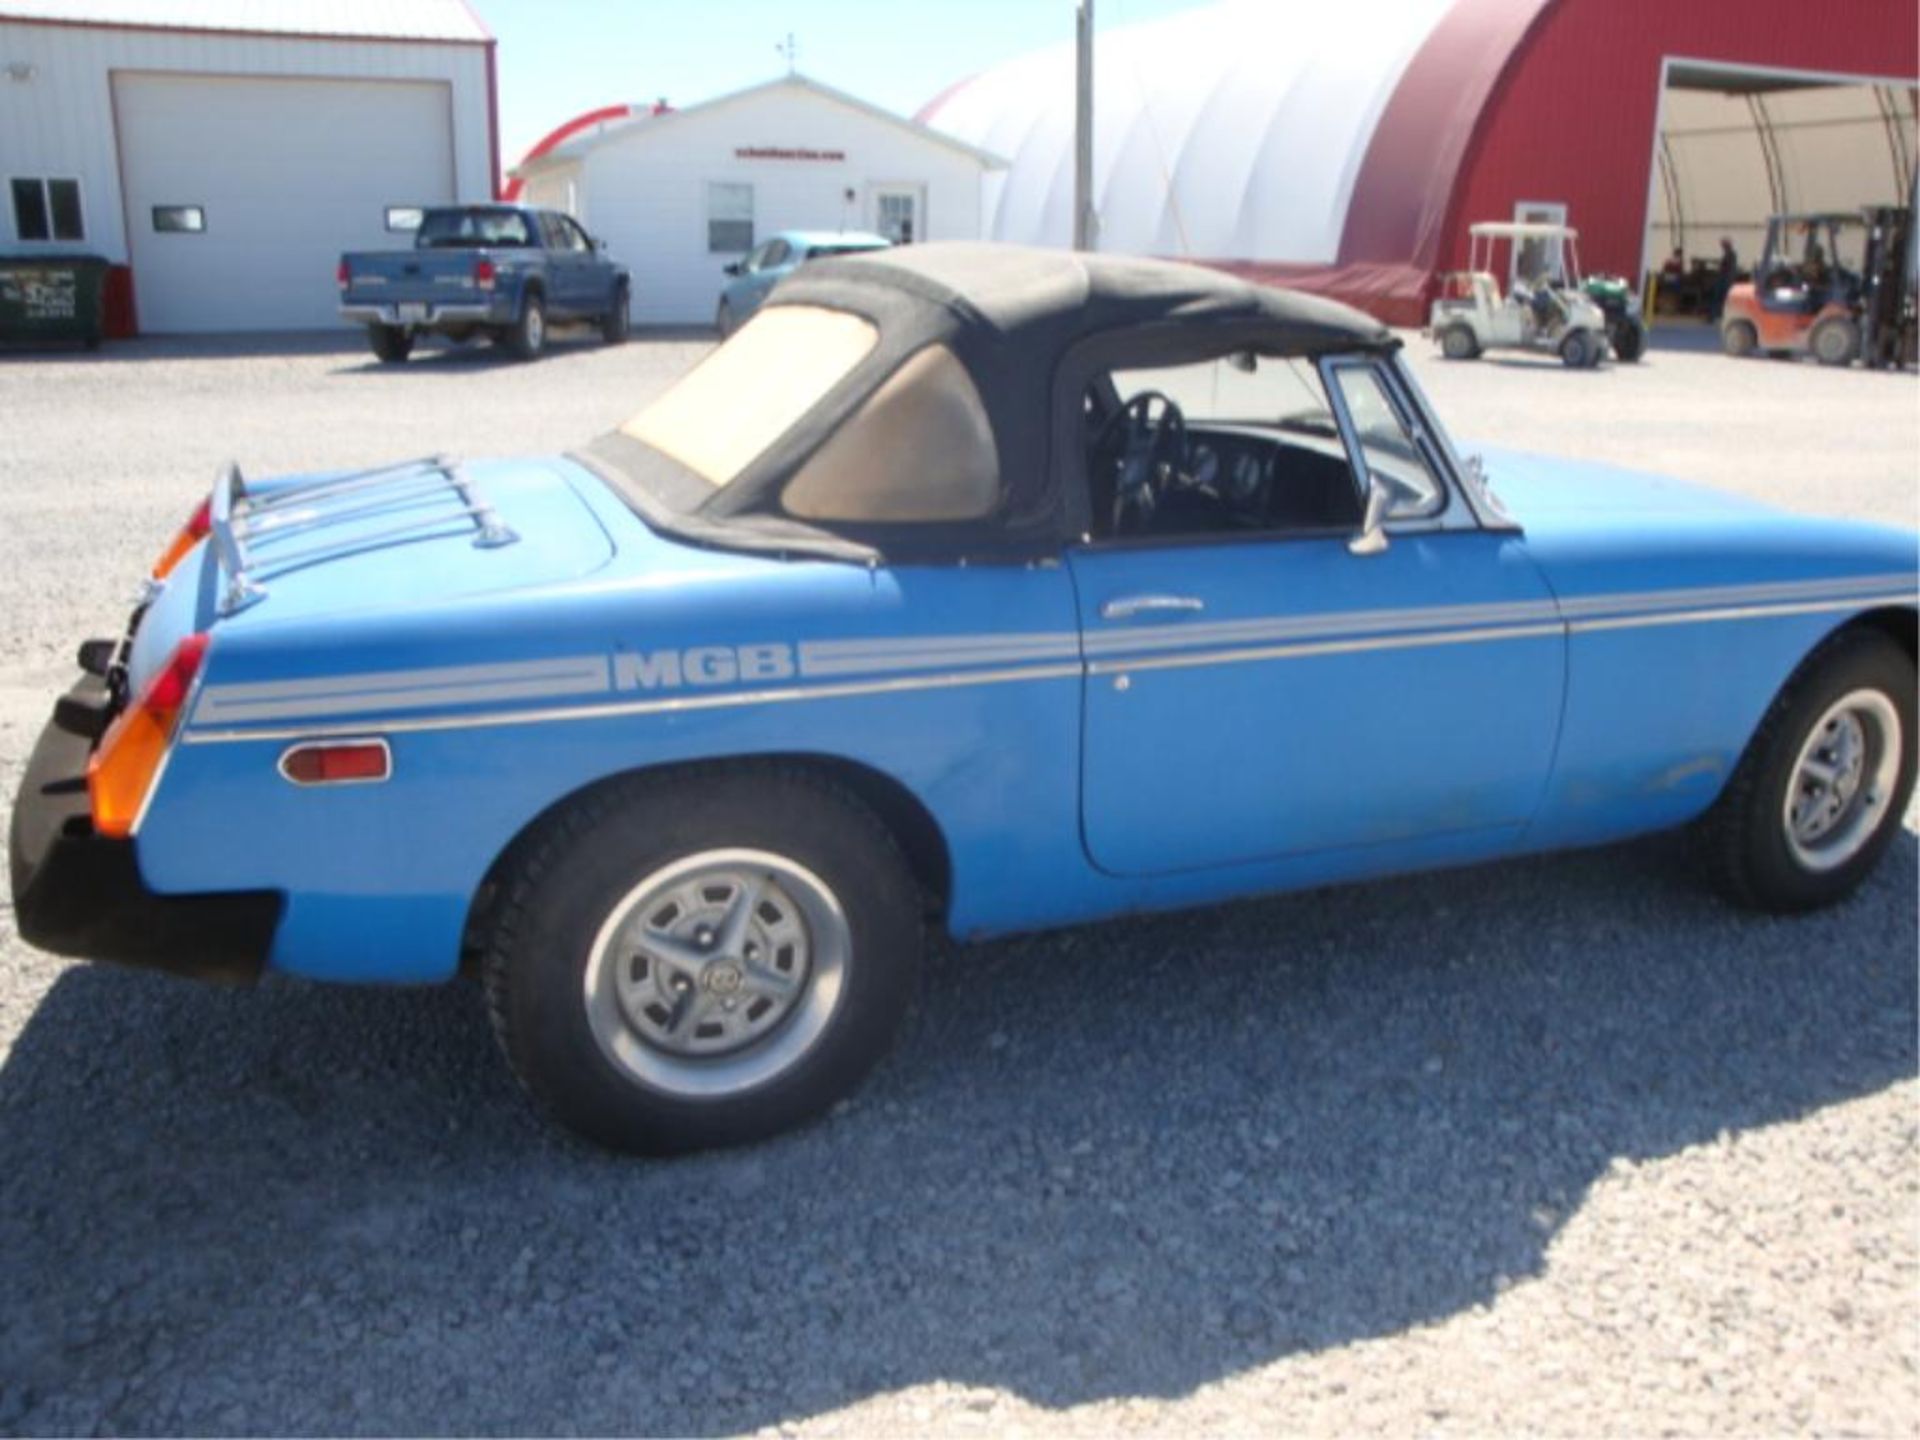 (Title) 1979 MGB, 14,890 miles on ODO,New in 2014: fuel pump, gas tank, clutch, radiator rodded - Image 13 of 34